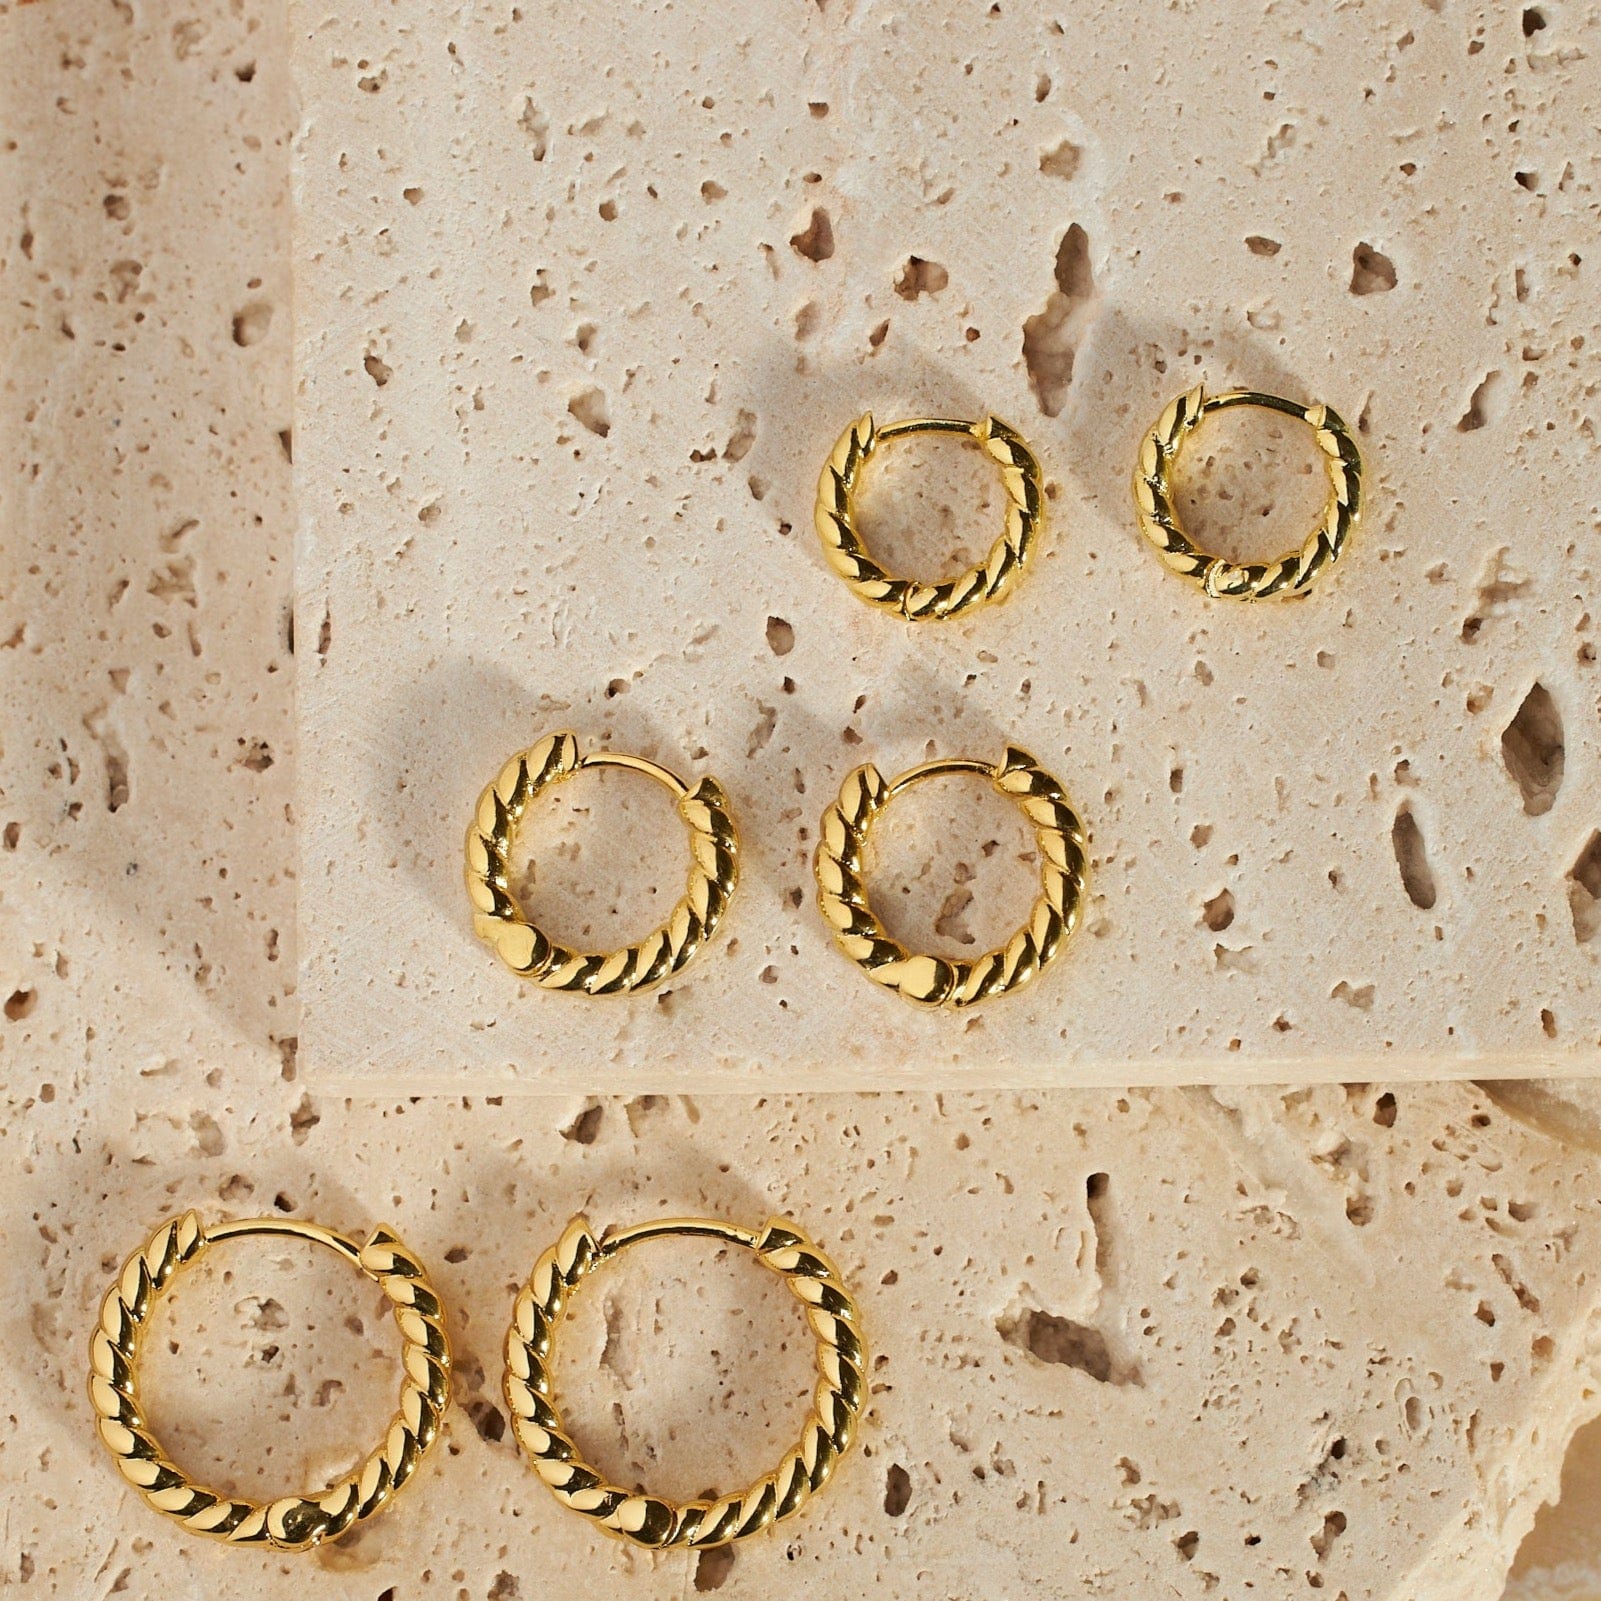 The three pairs of earrings in the Bordeaux Hoop Trio lay on two porous stone slabs, each pair with a different diameter hoop but the same twisted design.  